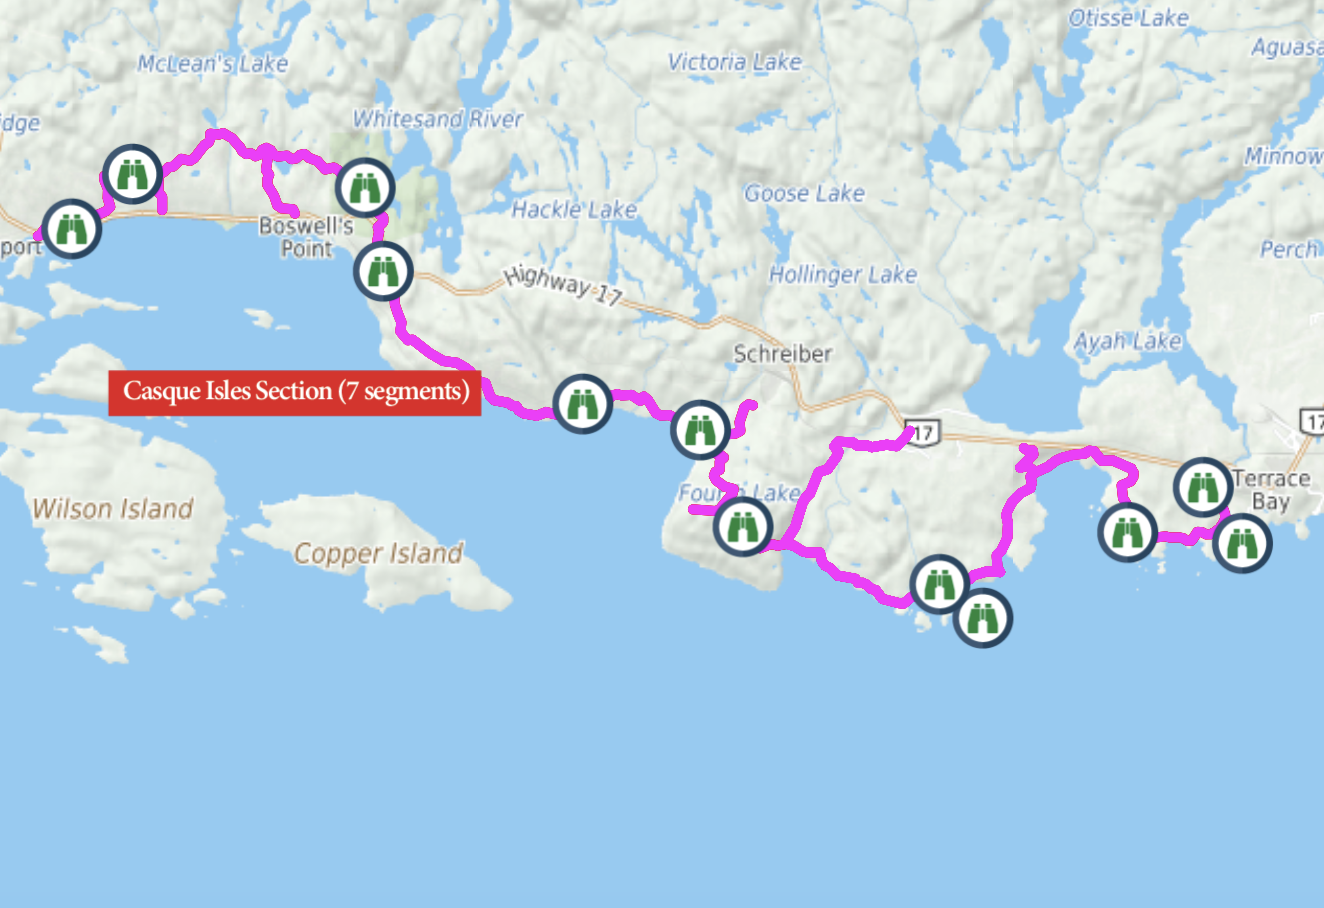 a map of the Casque-Isles Section of the Voyageur's Trail